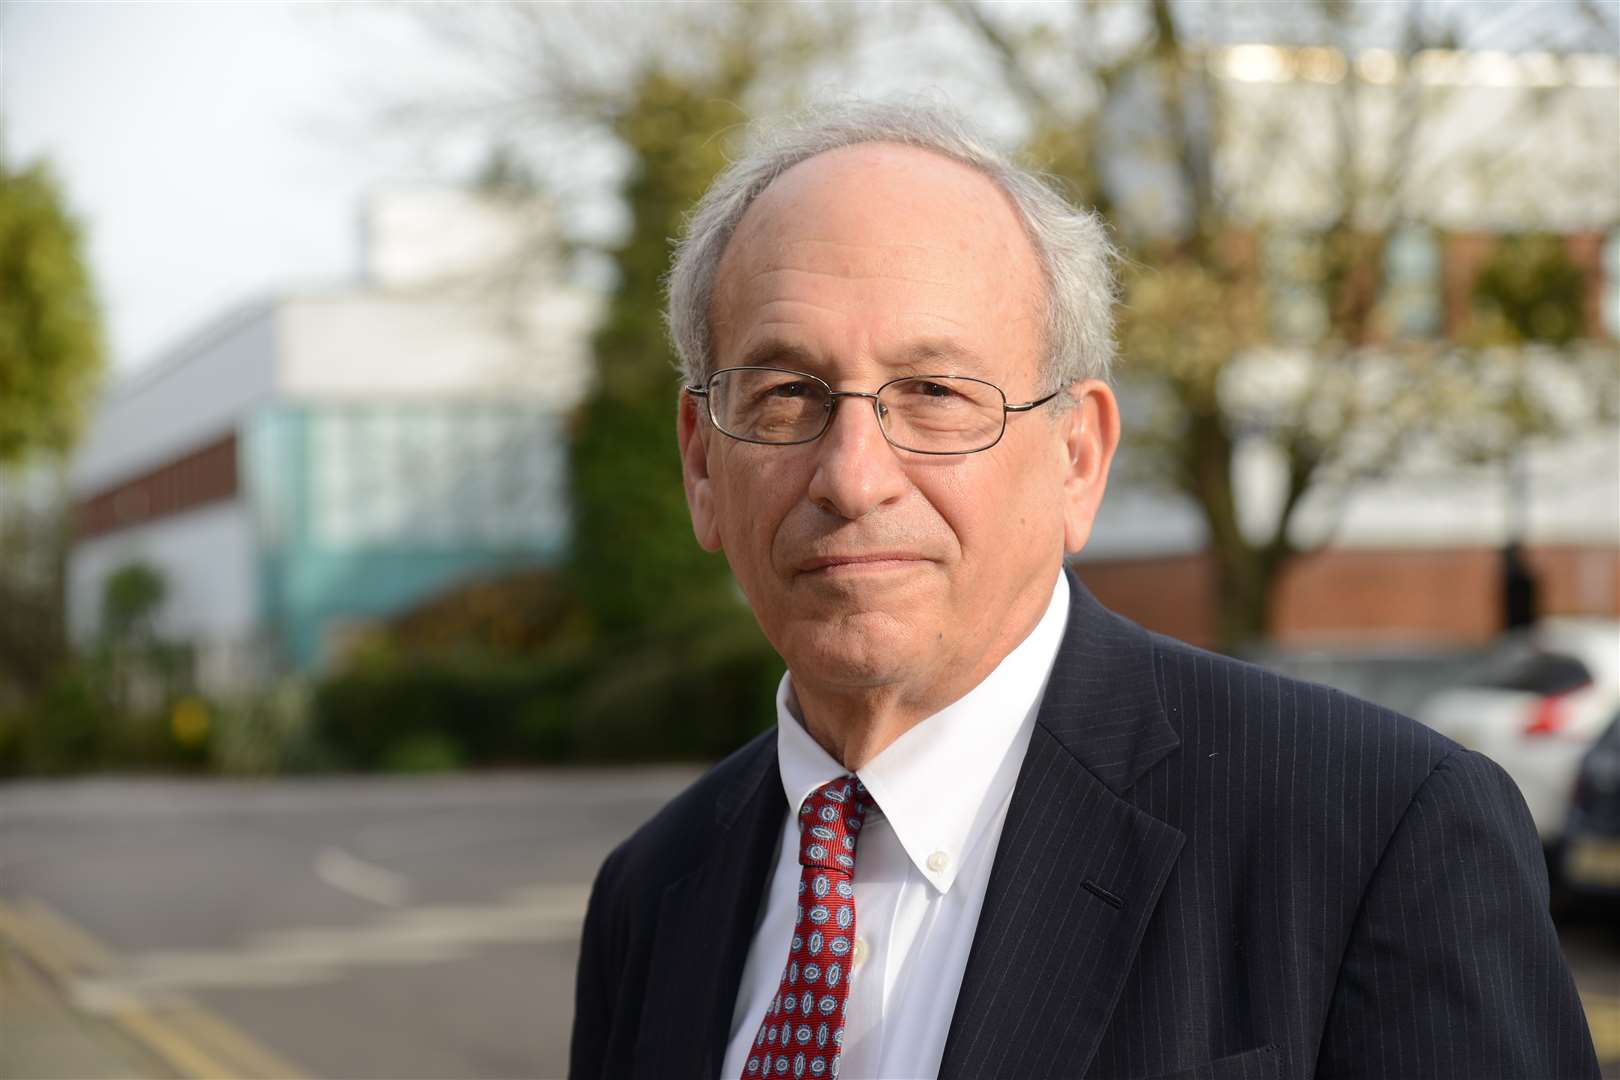 Don Kohn, member of the Bank of England financial policy committee